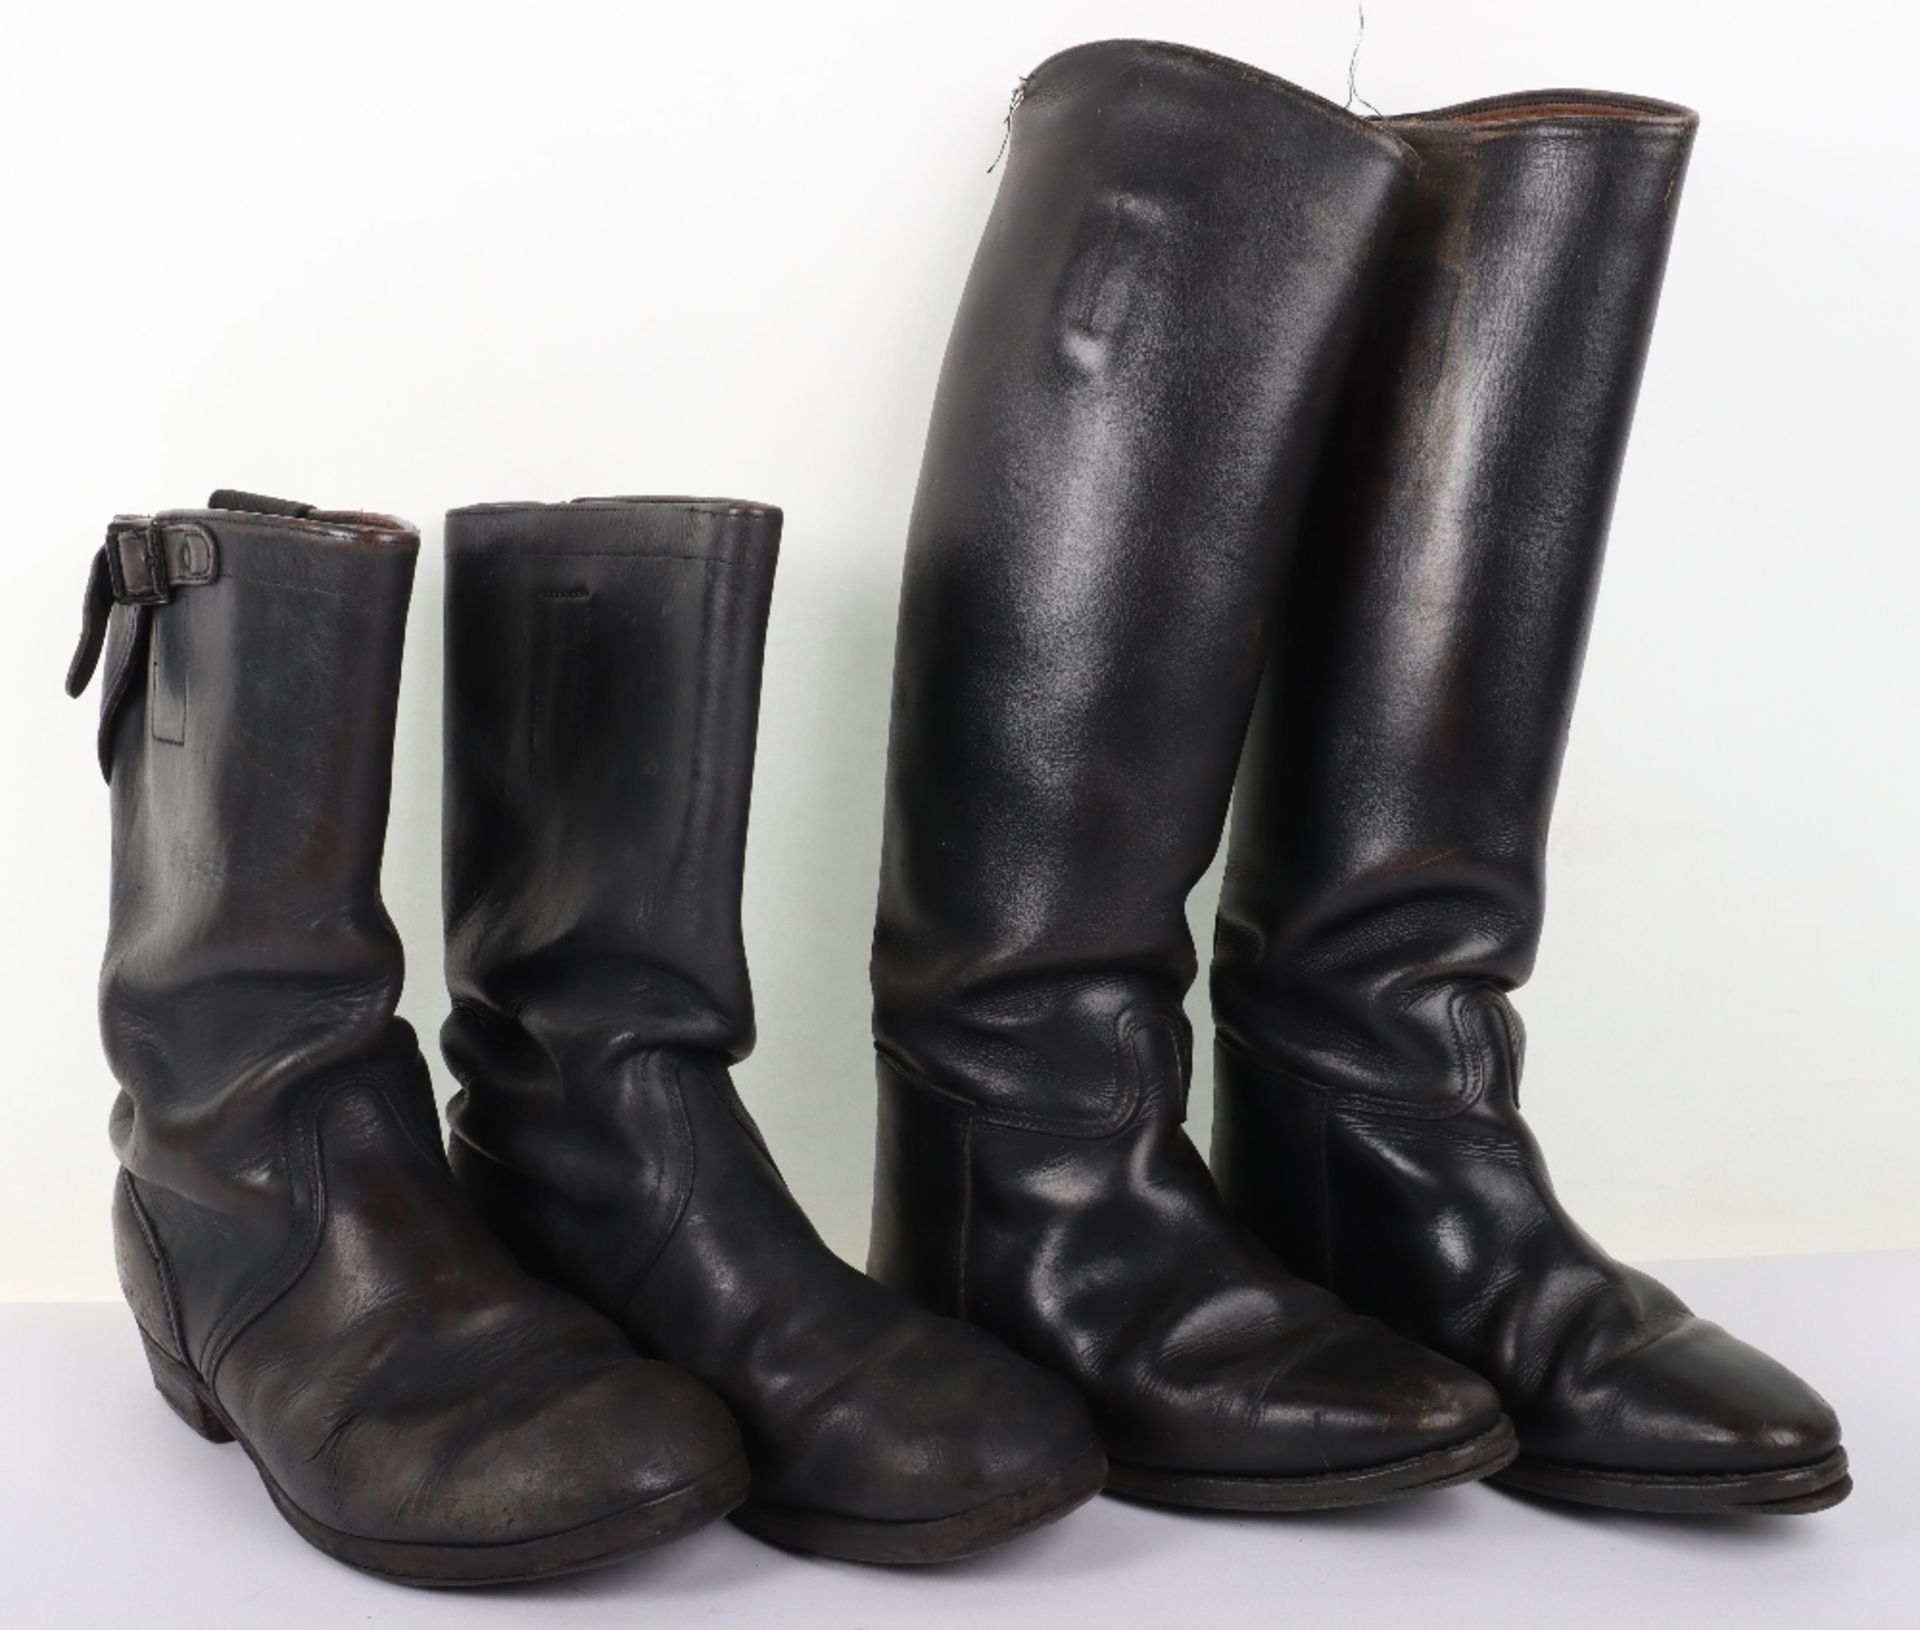 Pair of WW2 Style German Black Leather Boots